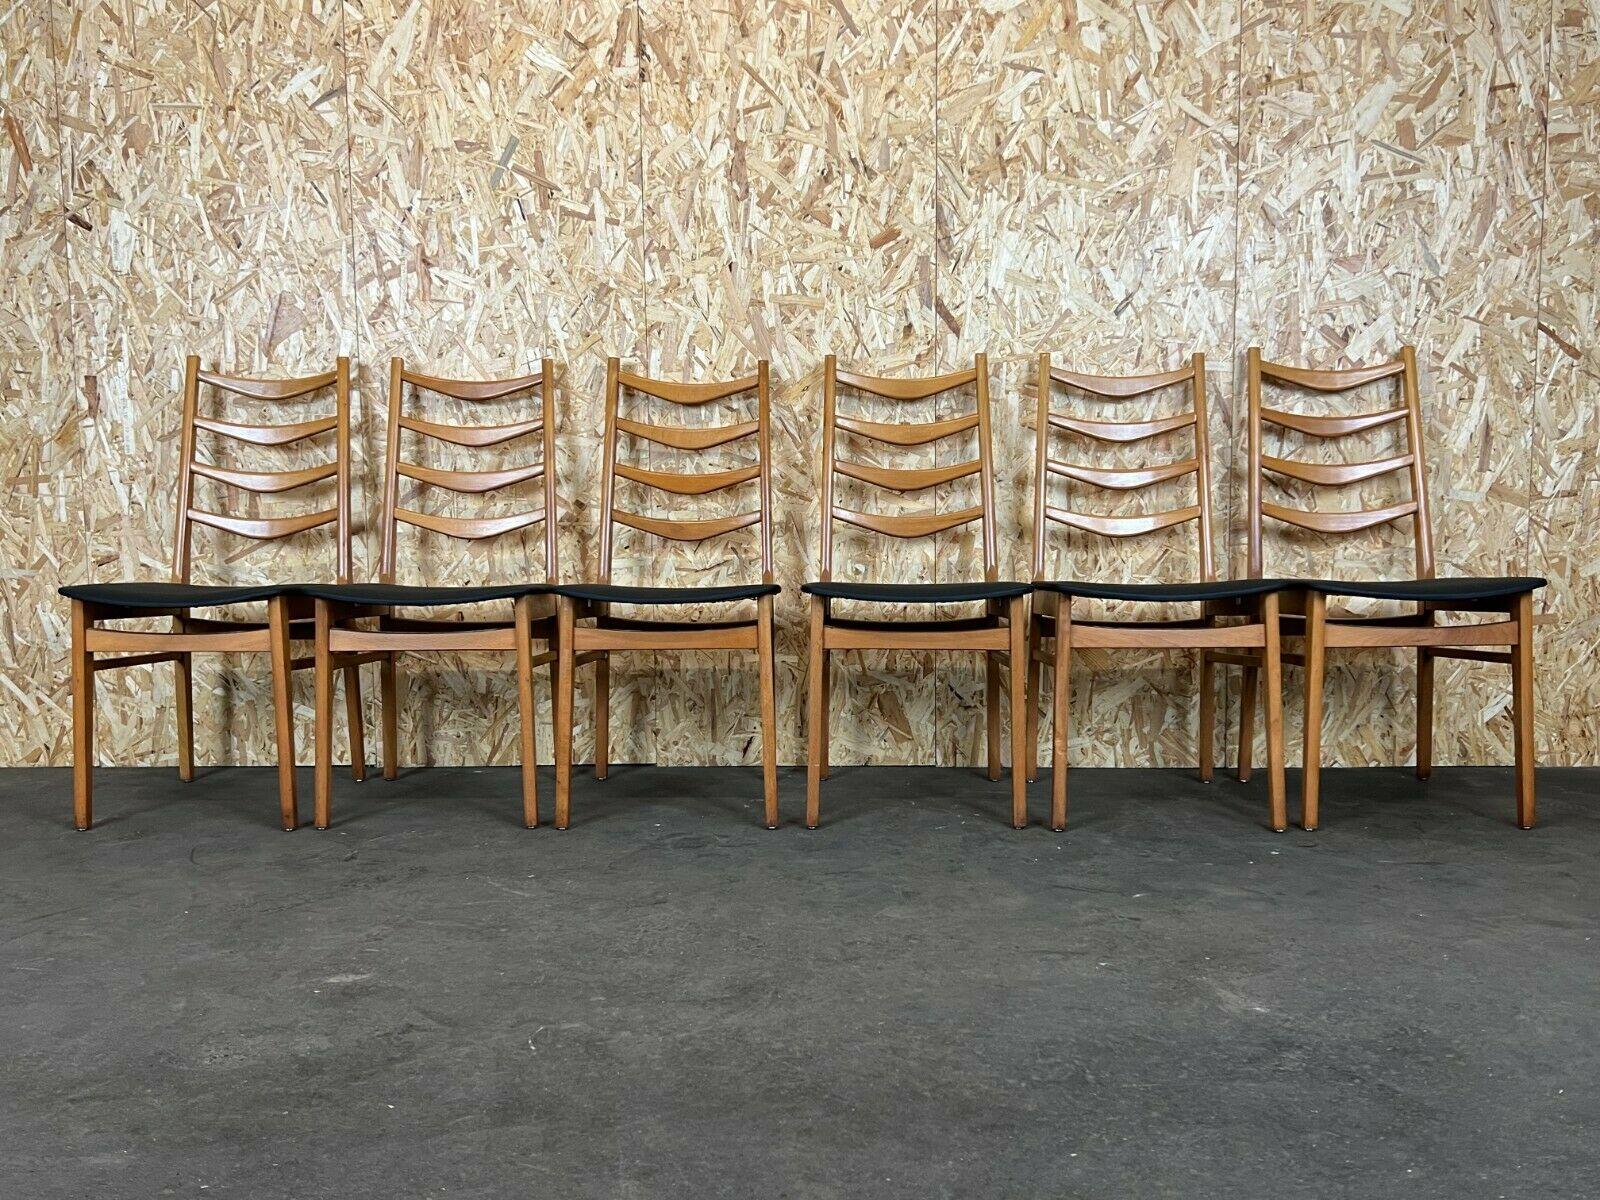 6x 60s 70s chairs chair dining chairs Danish Design 60s

Object: 6x chair

Manufacturer:

Condition: good

Age: around 1960-1970

Dimensions:

43cm x 54cm x 90cm
Seat height = 44cm

Other notes:

The pictures serve as part of the